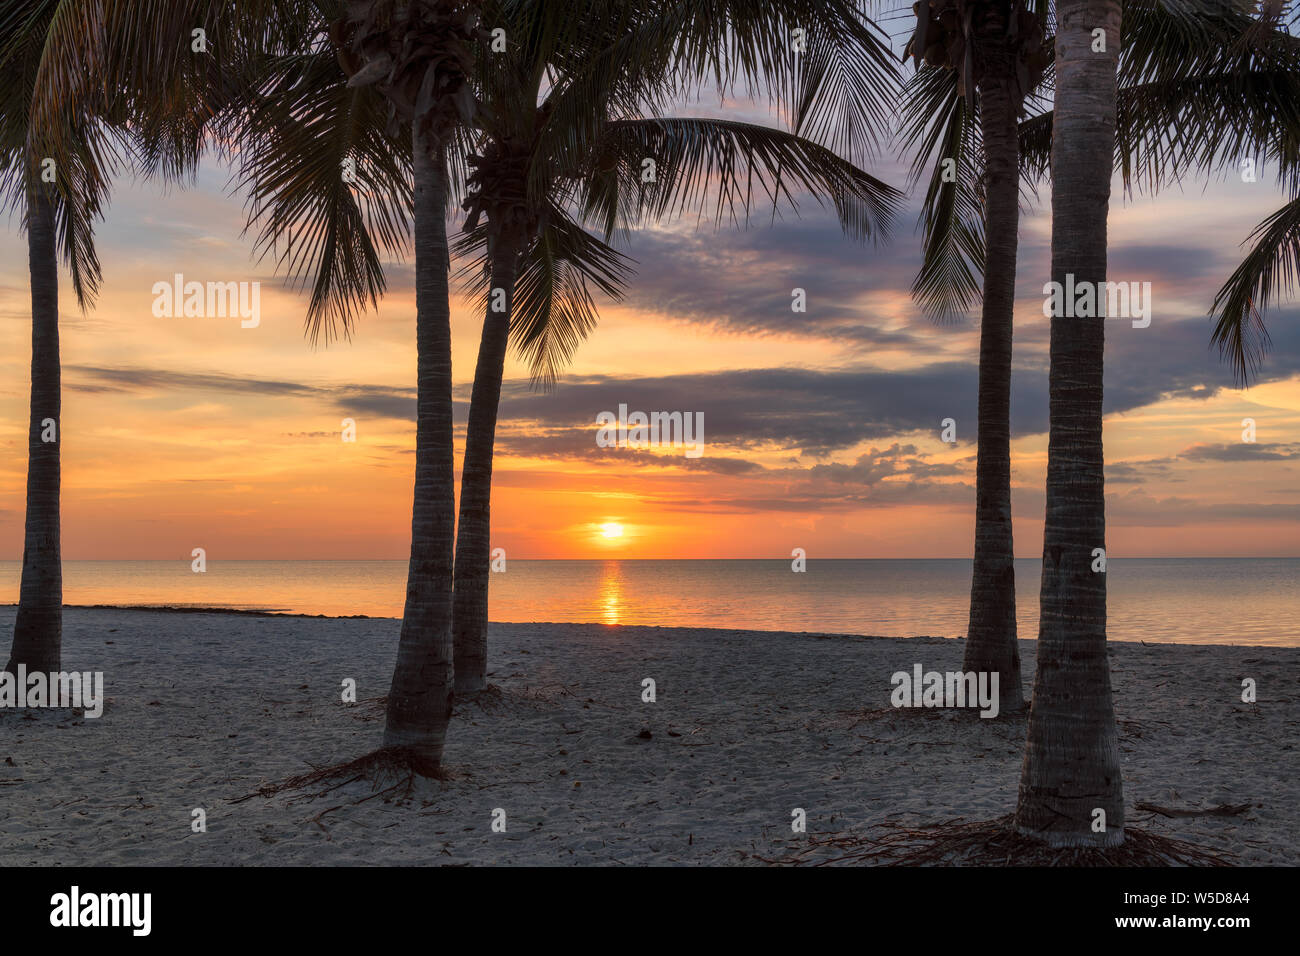 Sunrise at palm trees by the ocean beach in Key Biscayne, Florida Stock Photo